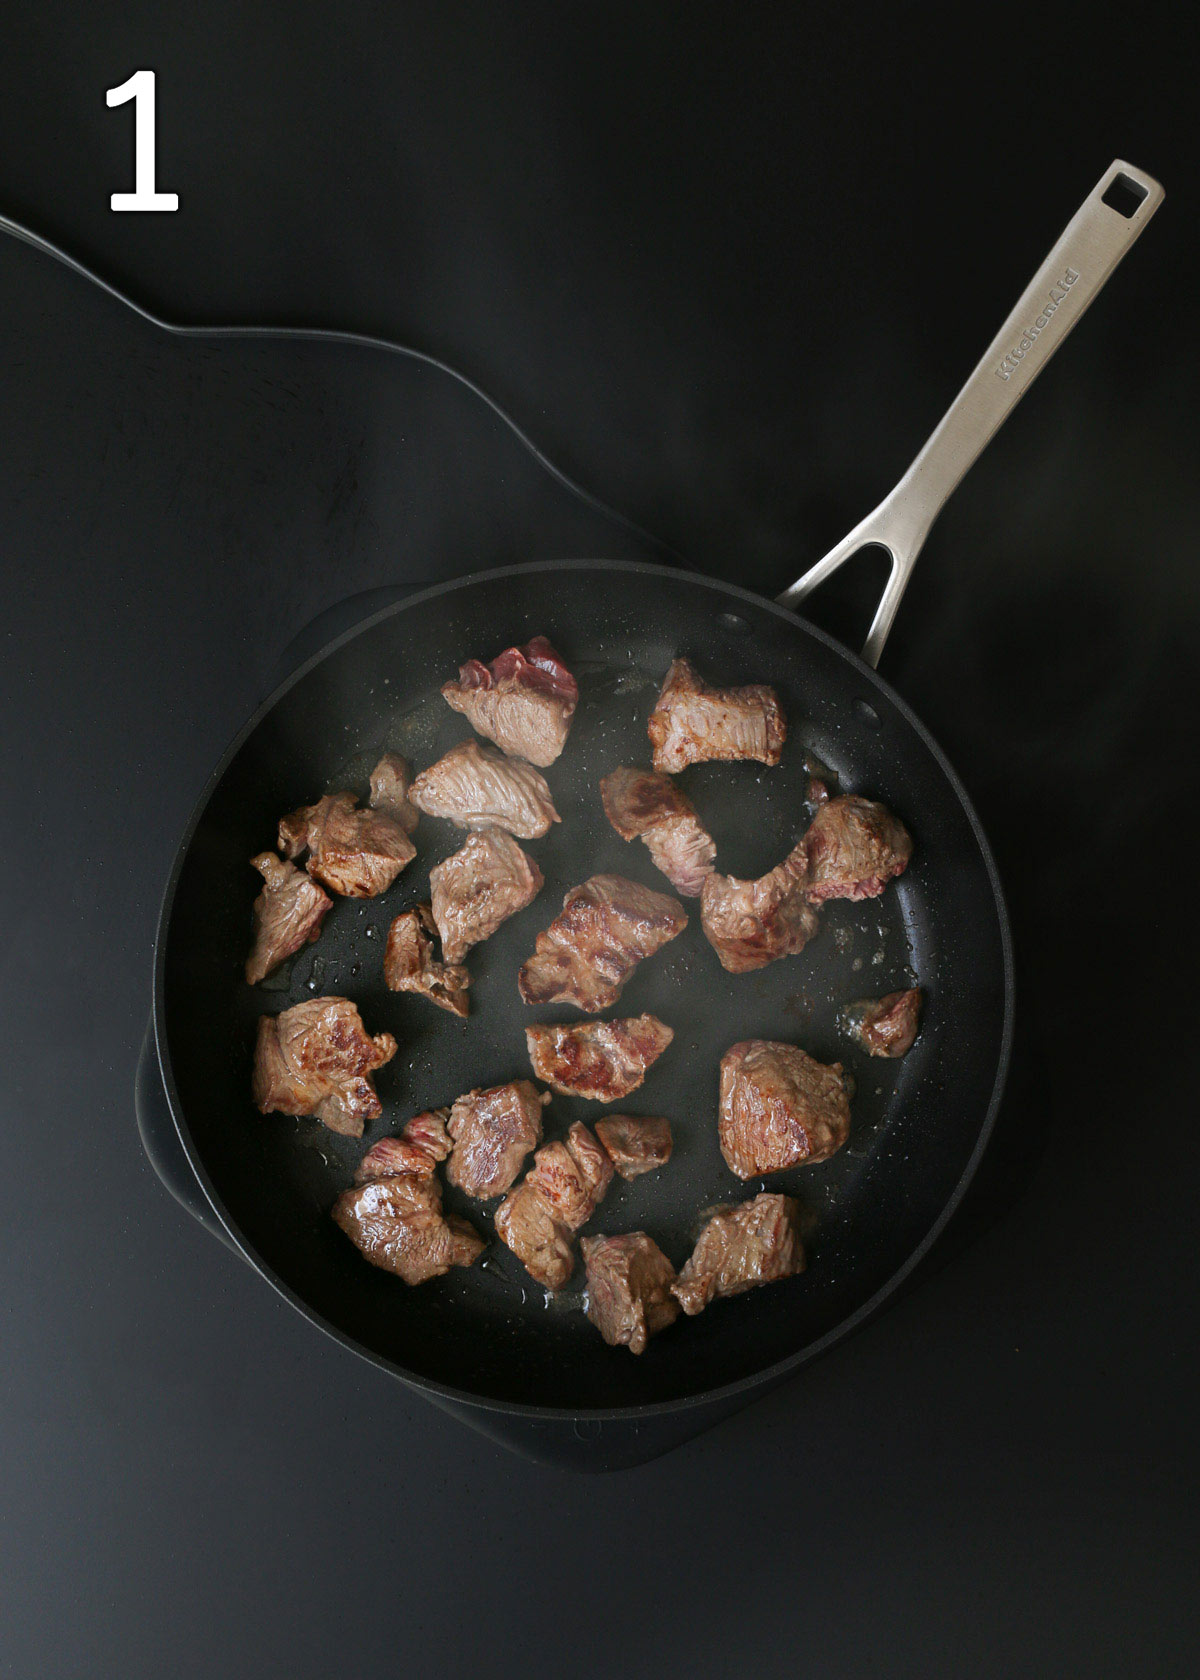 sauteing the beef cubes in batches in the skillet.